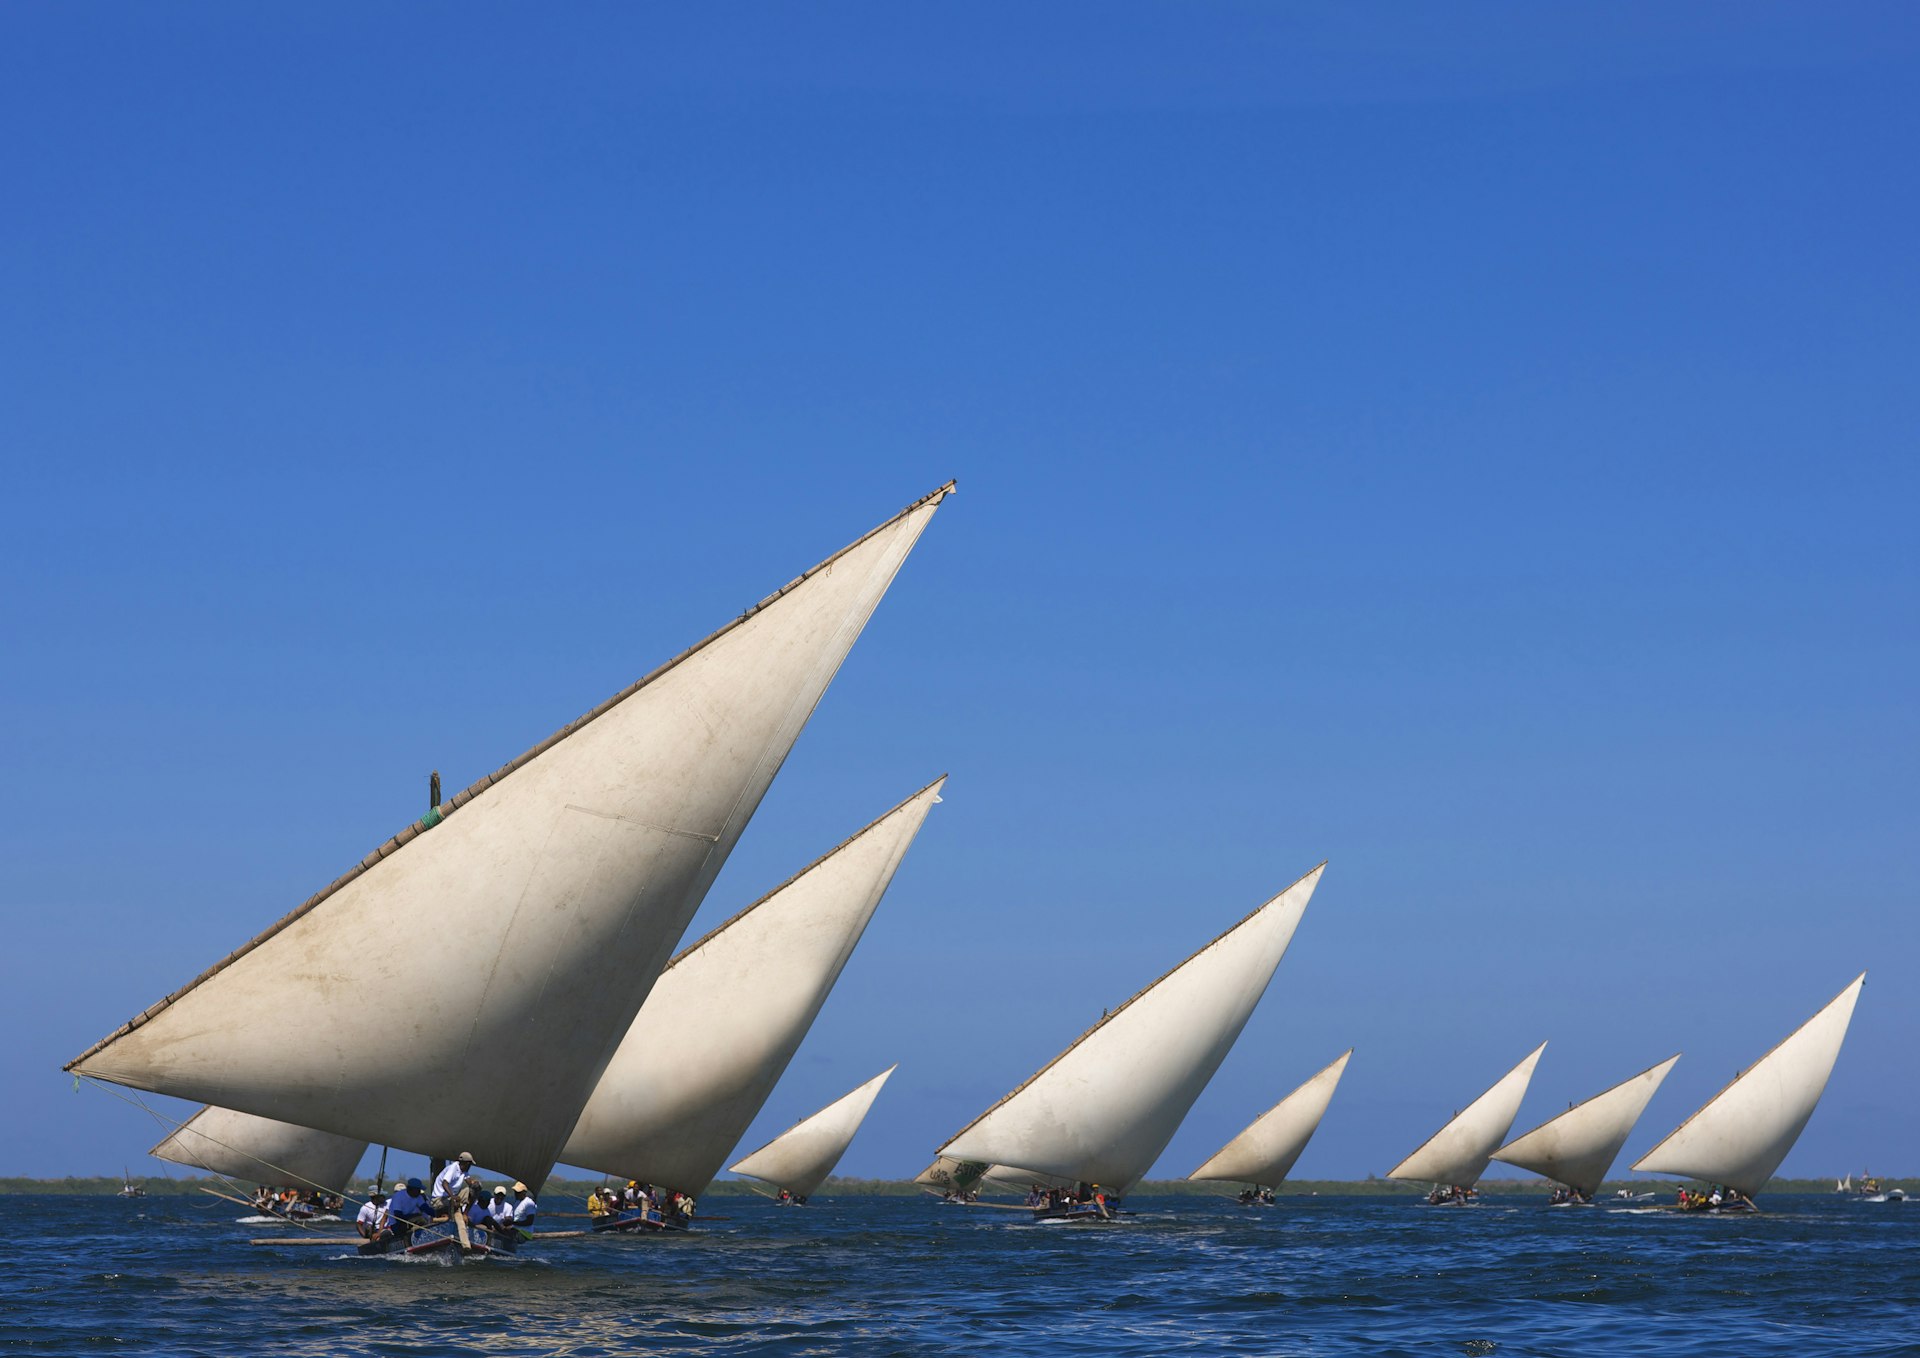 Dhows leaning into the wind under a blue sky